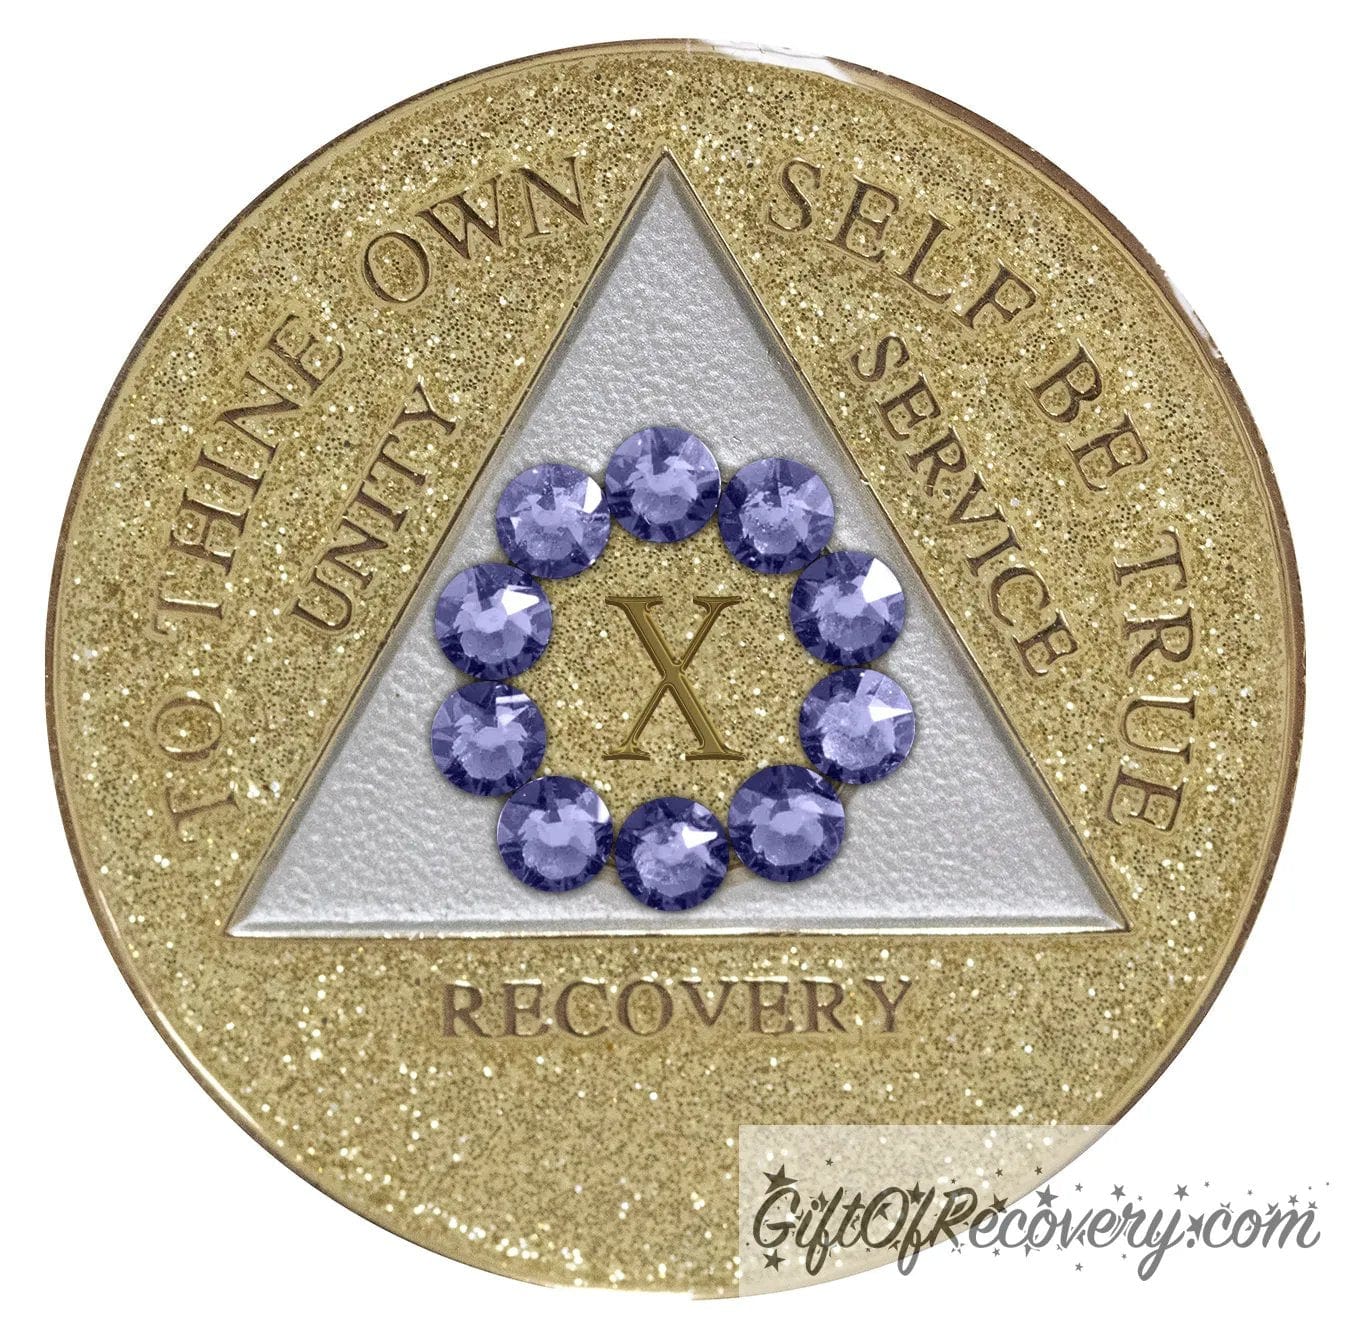 10 year AA medallion gold glitter with ten genuine purple crystal in the shape of a circle around the roman numeral to symbolize our common welfare and personal recovery, and the triangle soft silver, to thine own self be true, unity, service. recovery are embossed with 14k gold-plated brass the recovery medallion is sealed with resin for a scratch free shiny finish.